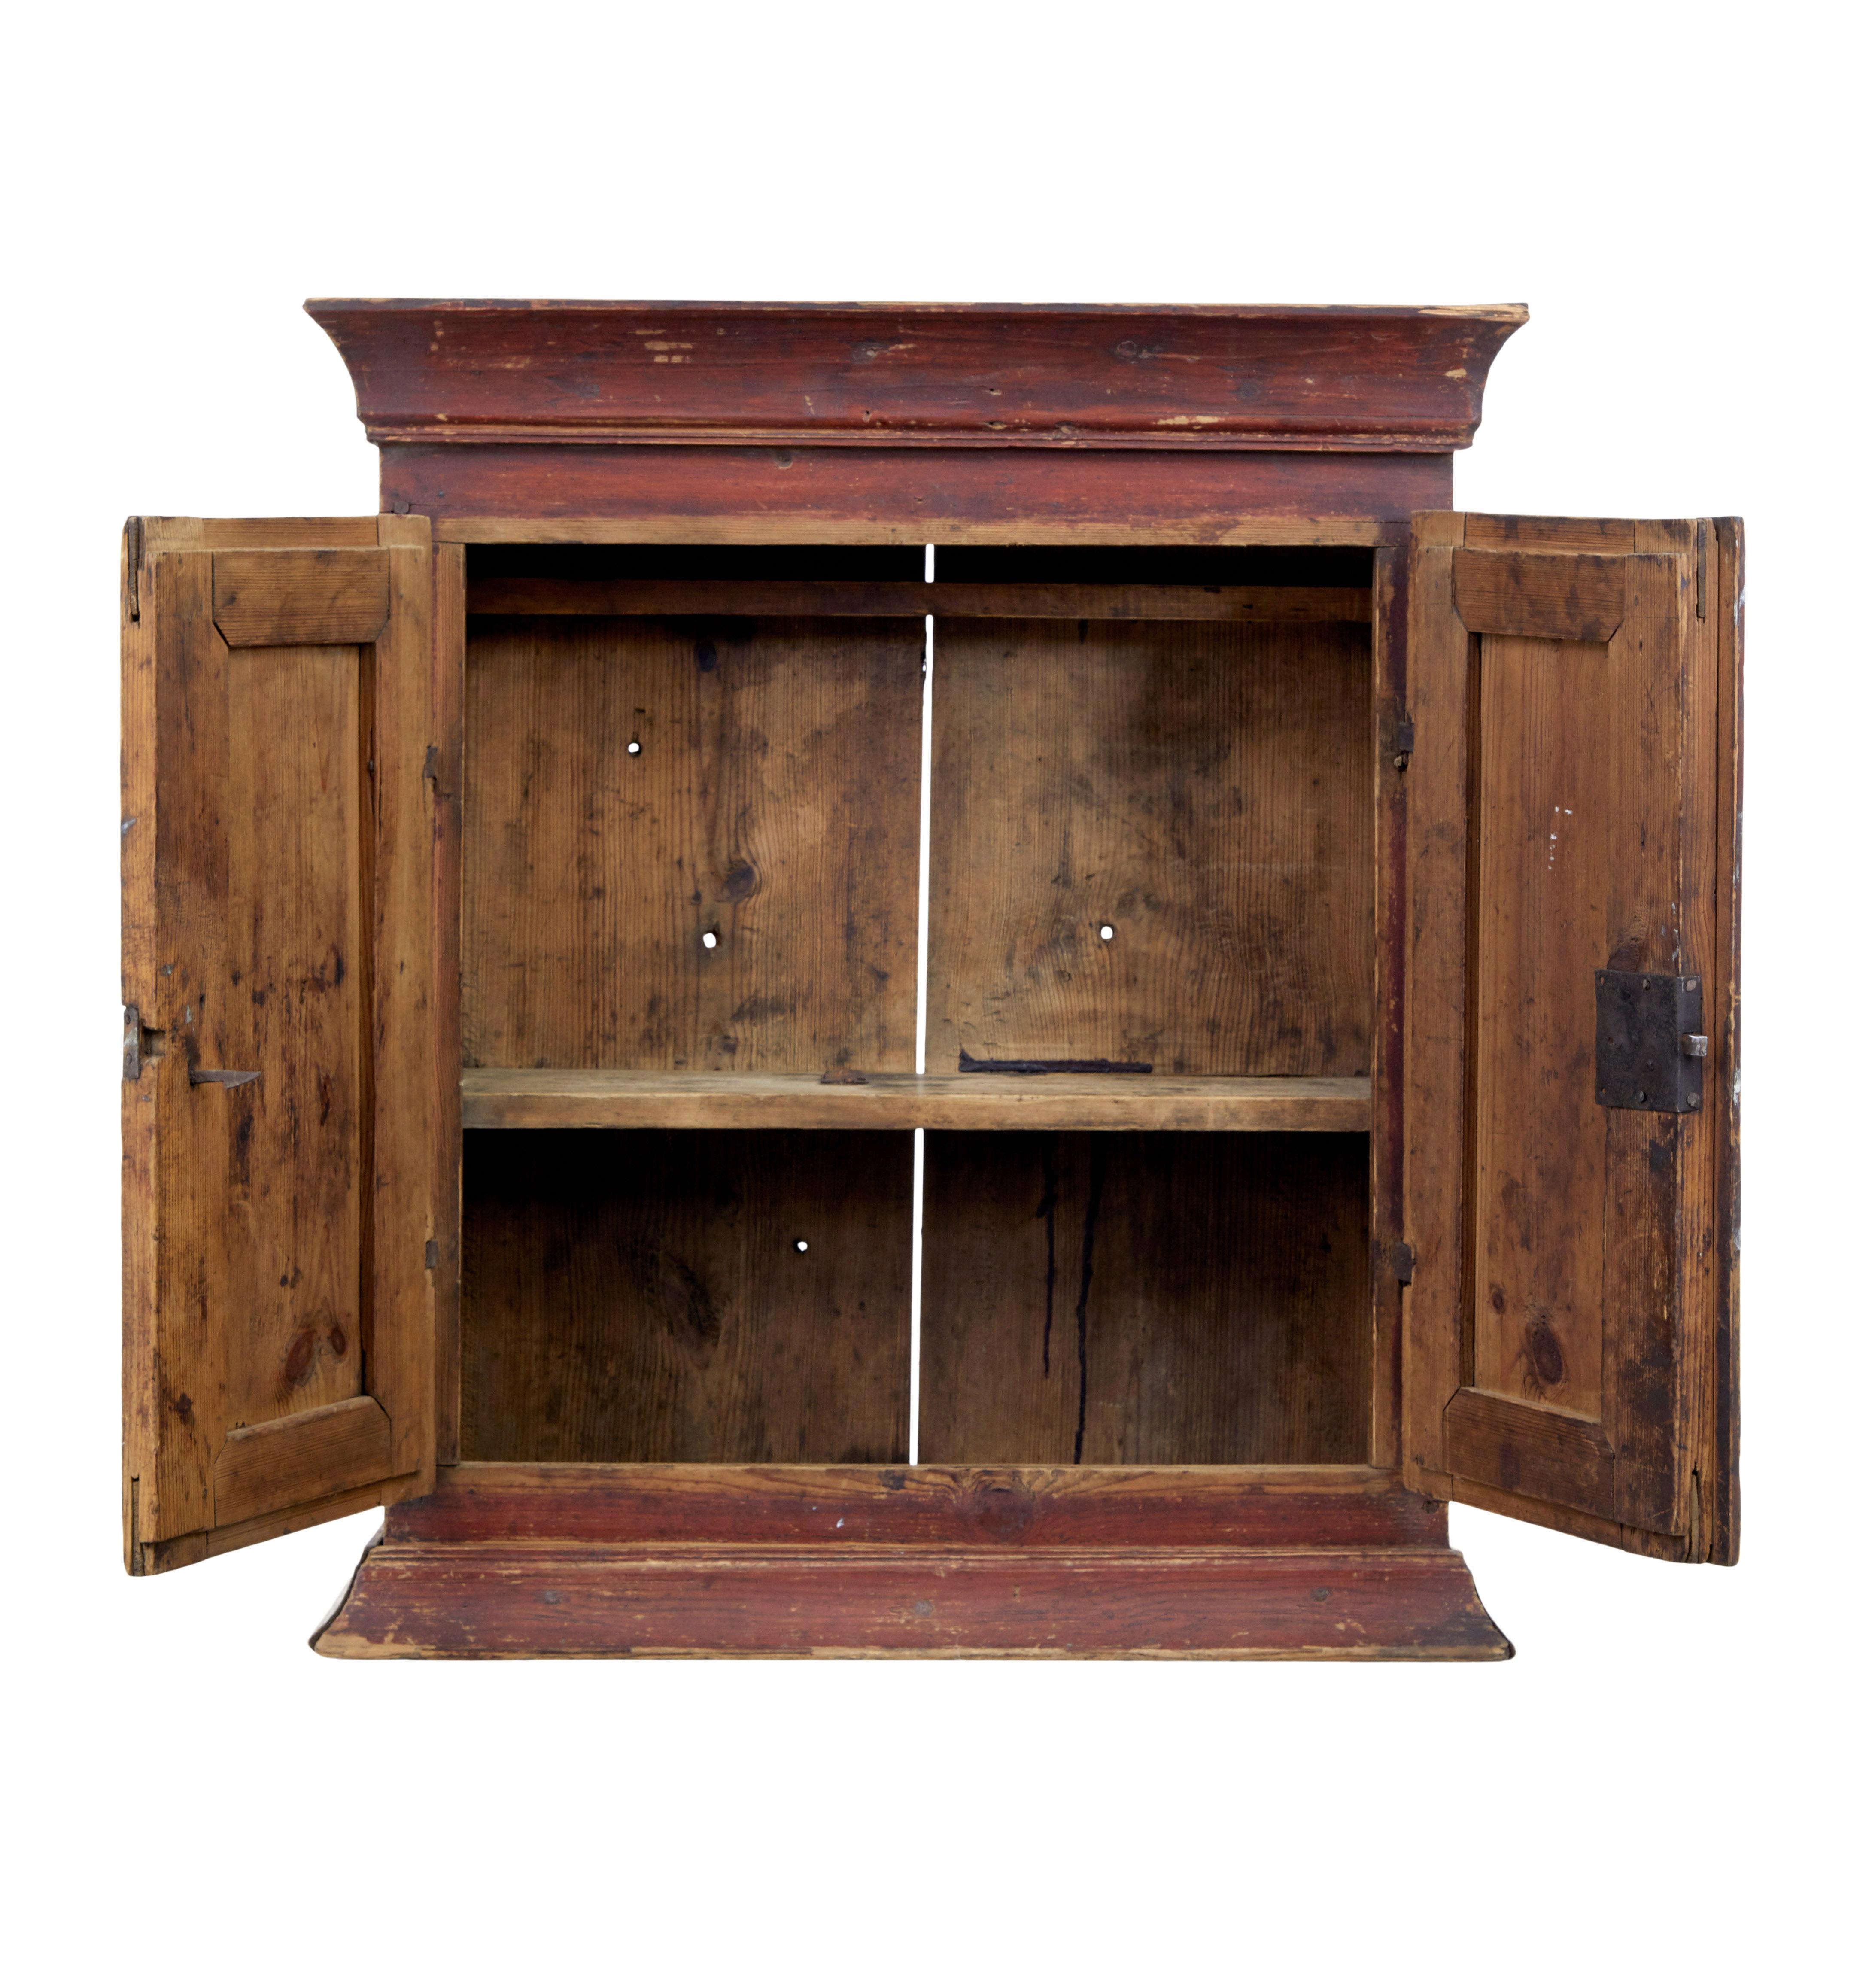 Swedish early 19th century painted pine wall cupboard circa 1820.

We are pleased to offer this 200 year old wall cupboard in original condition.

Presented in it's original paint.  Cornice around the top and bottom edgem, with double door's which